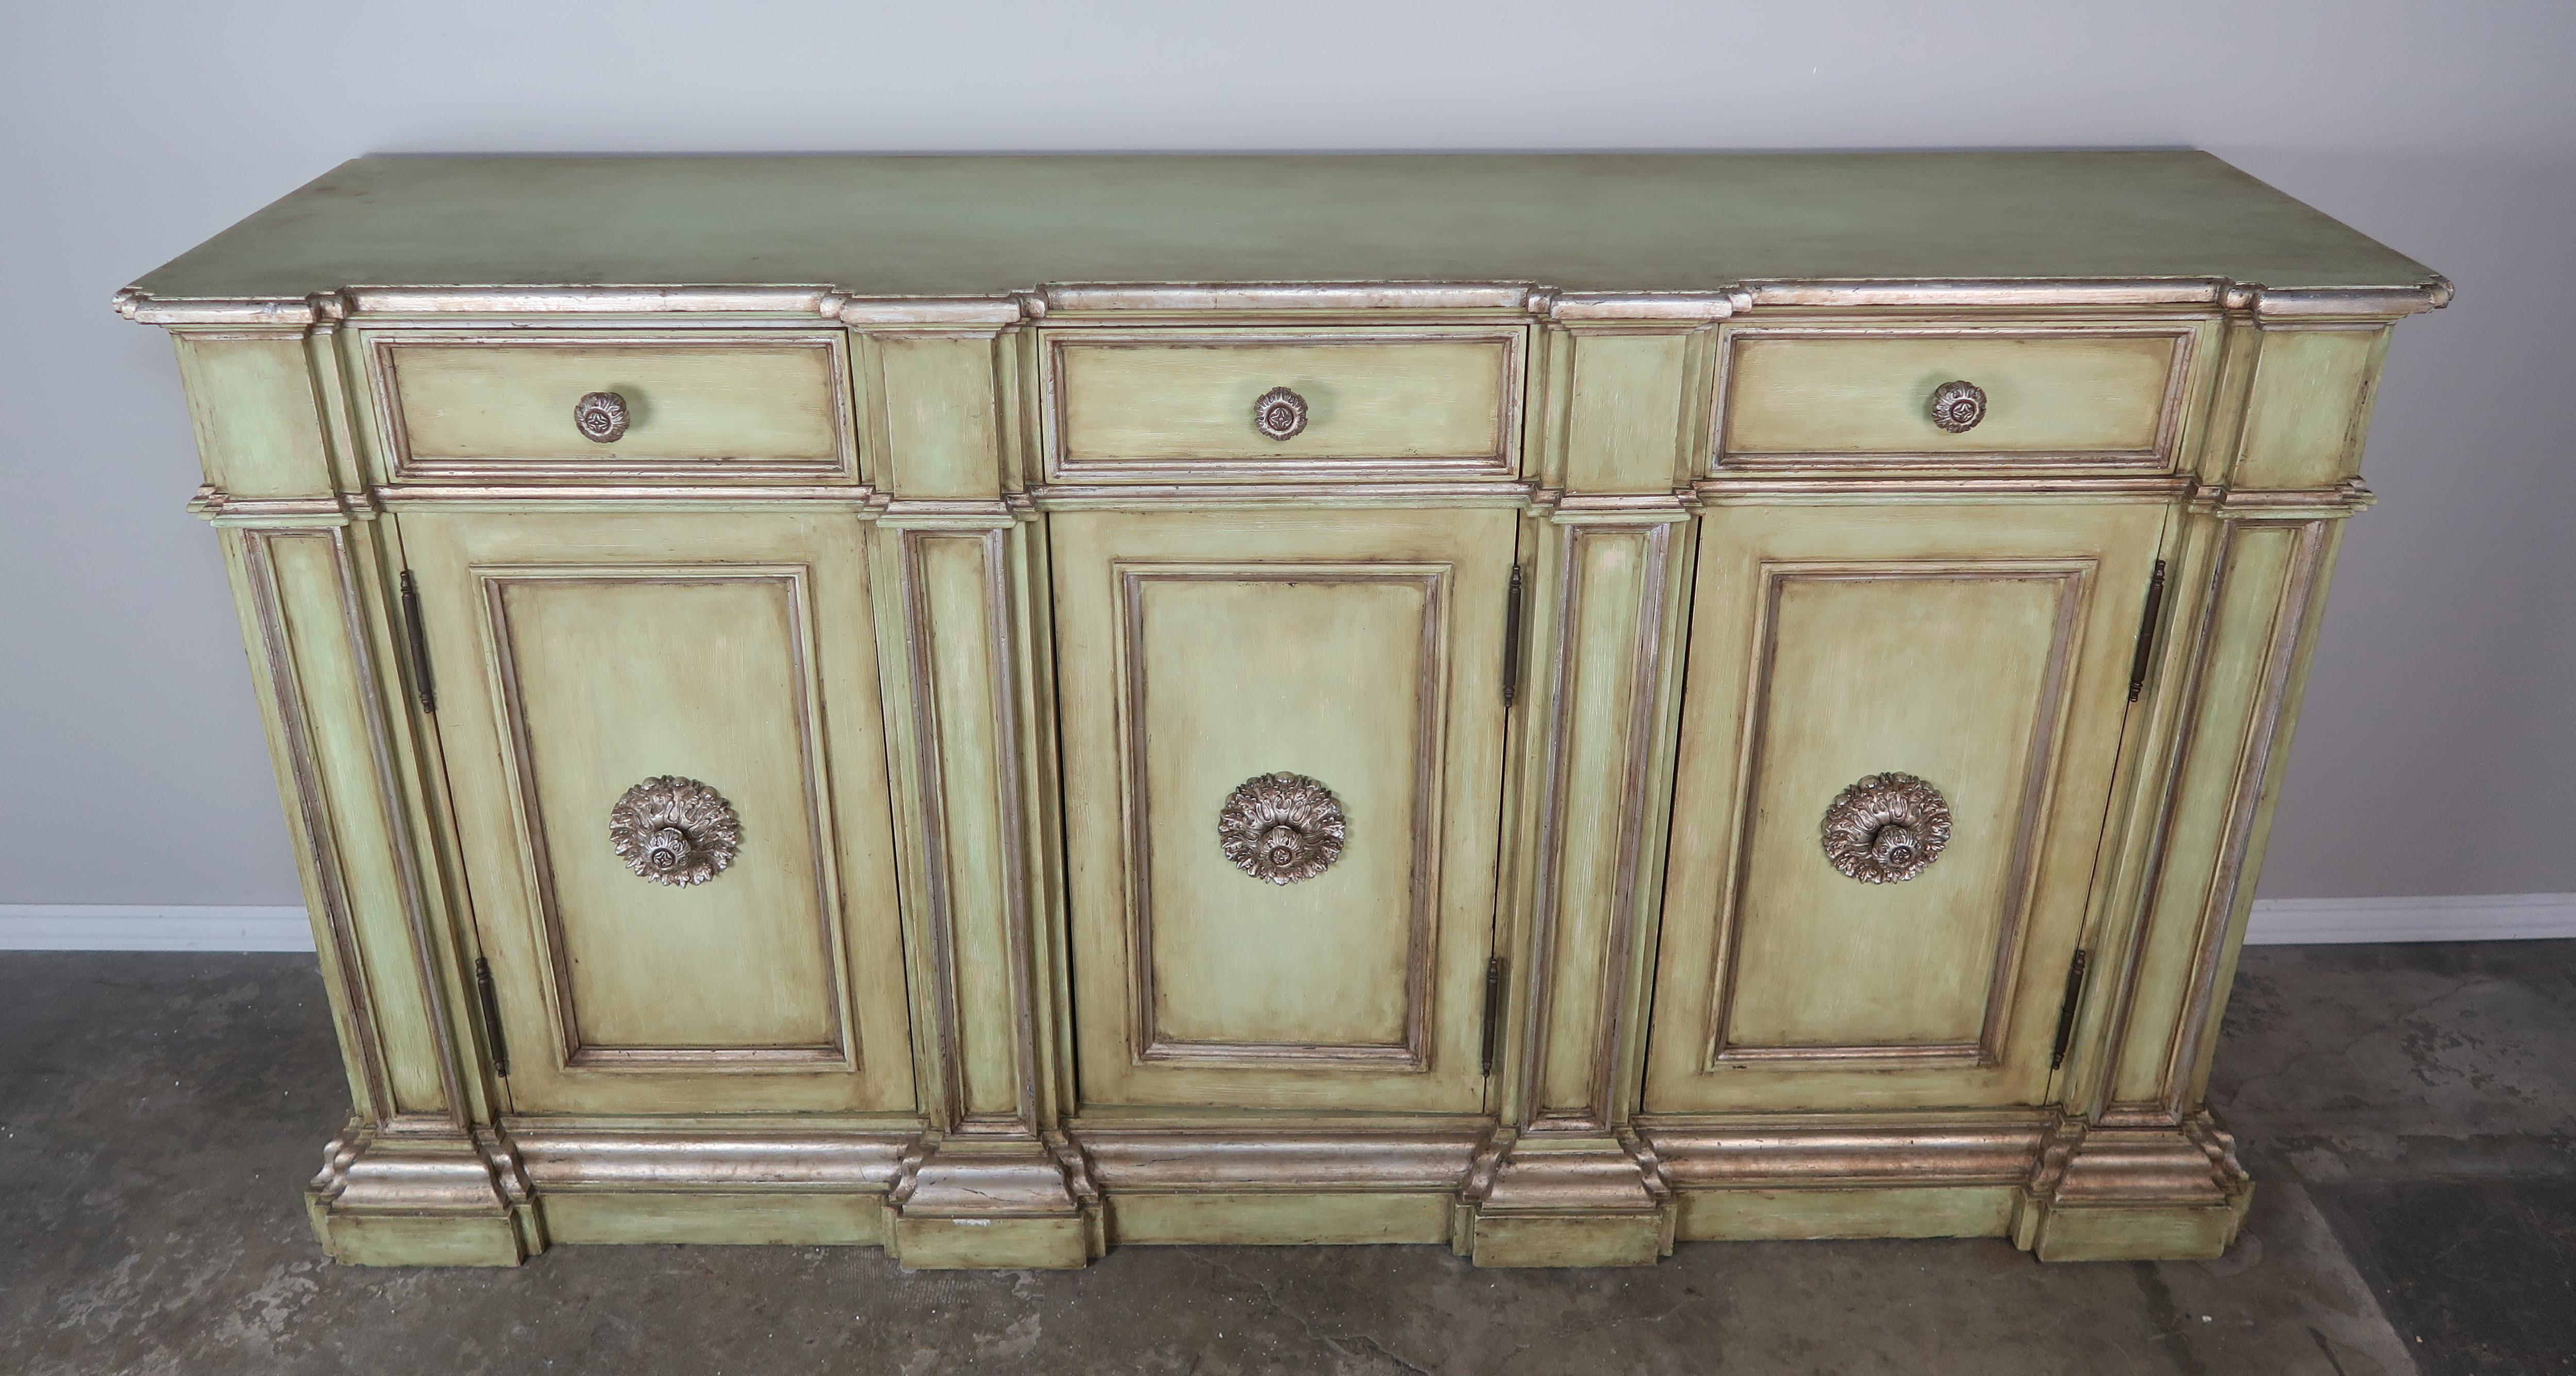 Italian painted neoclassical style credenza with doors with storage behind. There are also three drawers to accommodate storage as well. Beautiful carved round pull detail on all doors and drawers.